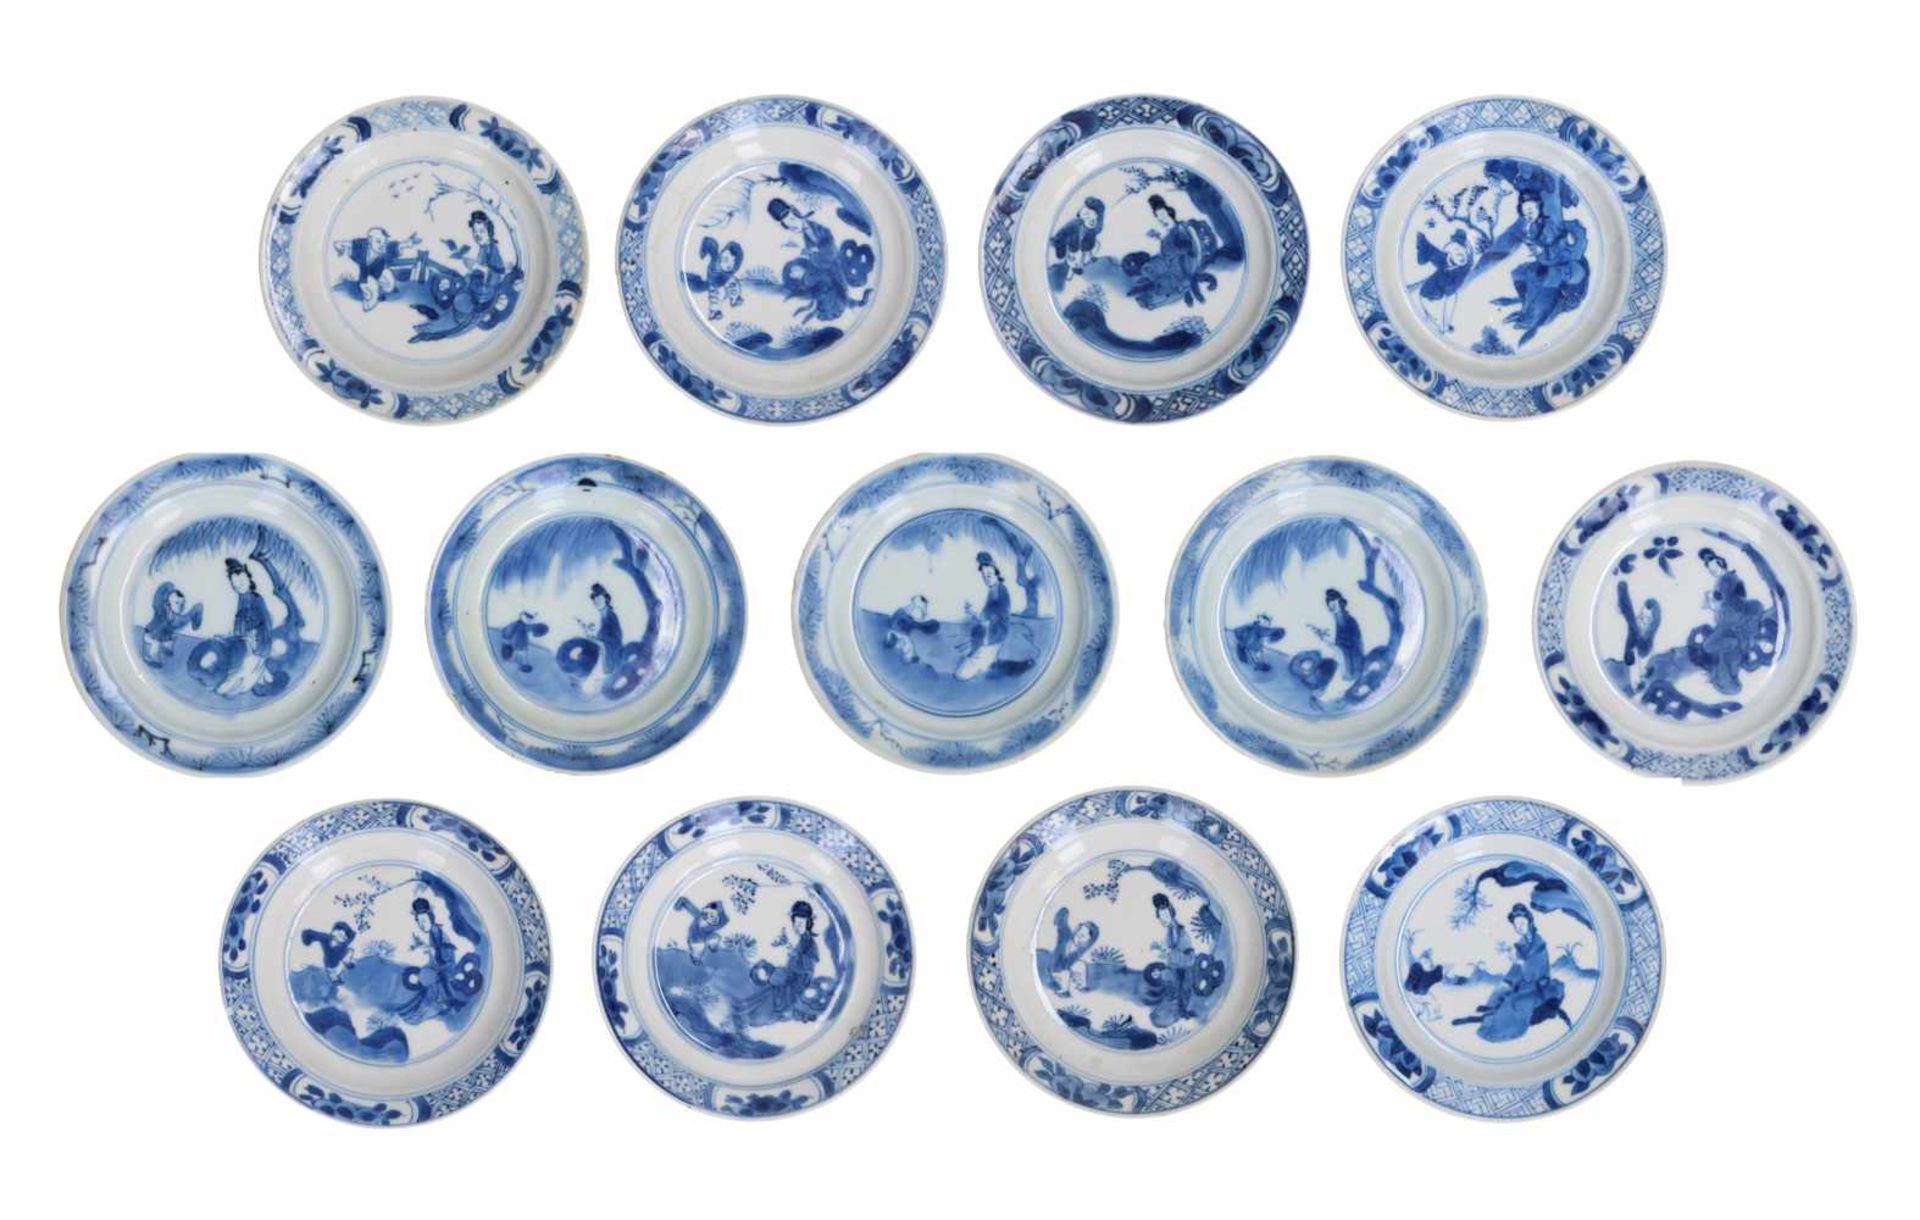 A set of 13 blue and white porcelain saucers, decorated with figures. Marked with 4-character